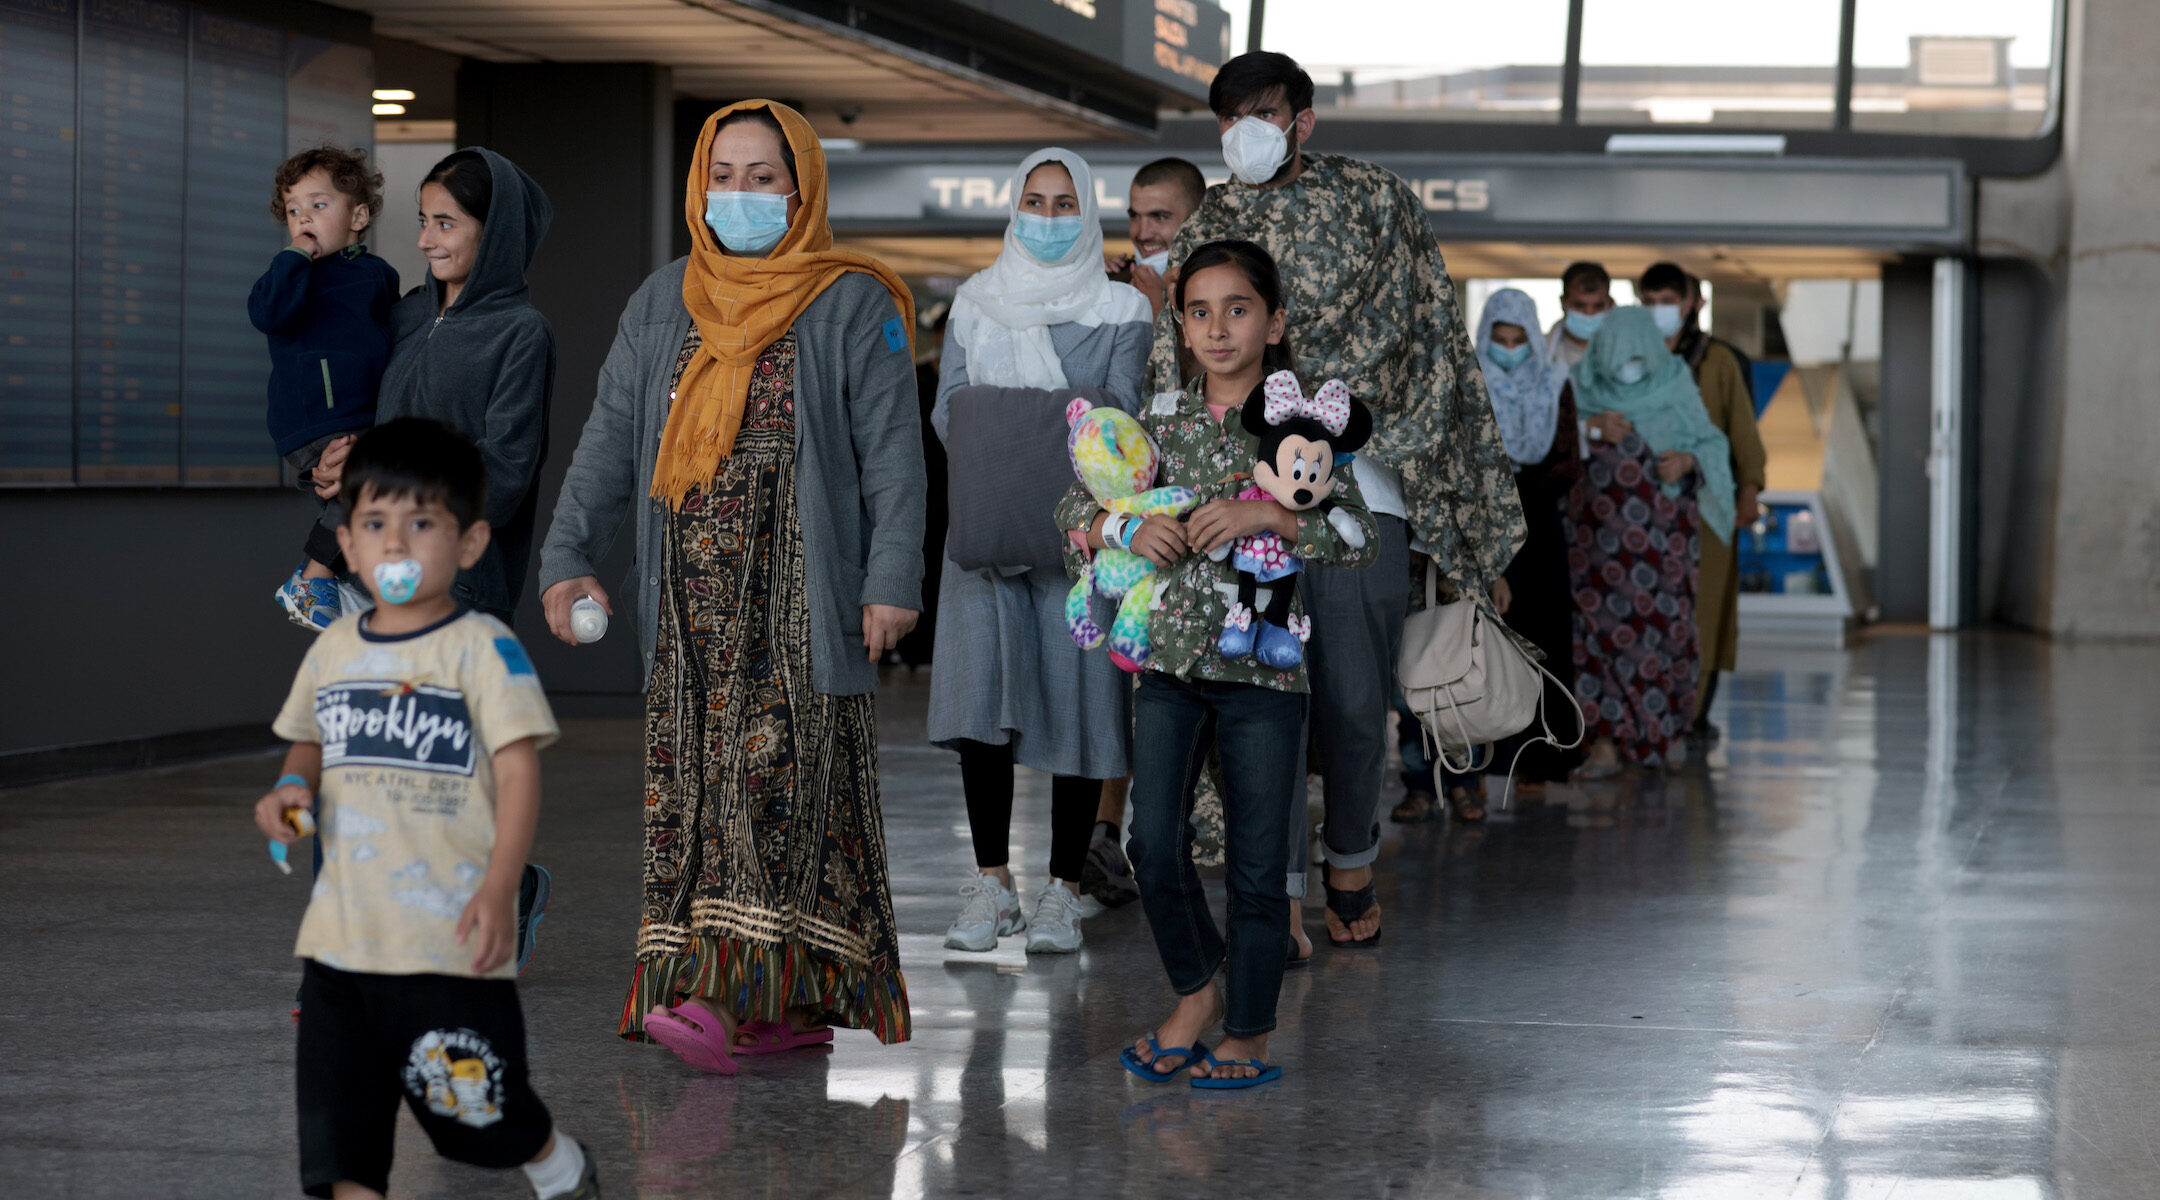 Refugees arriving at an airport; a girl clutches a Mickey Mouse doll